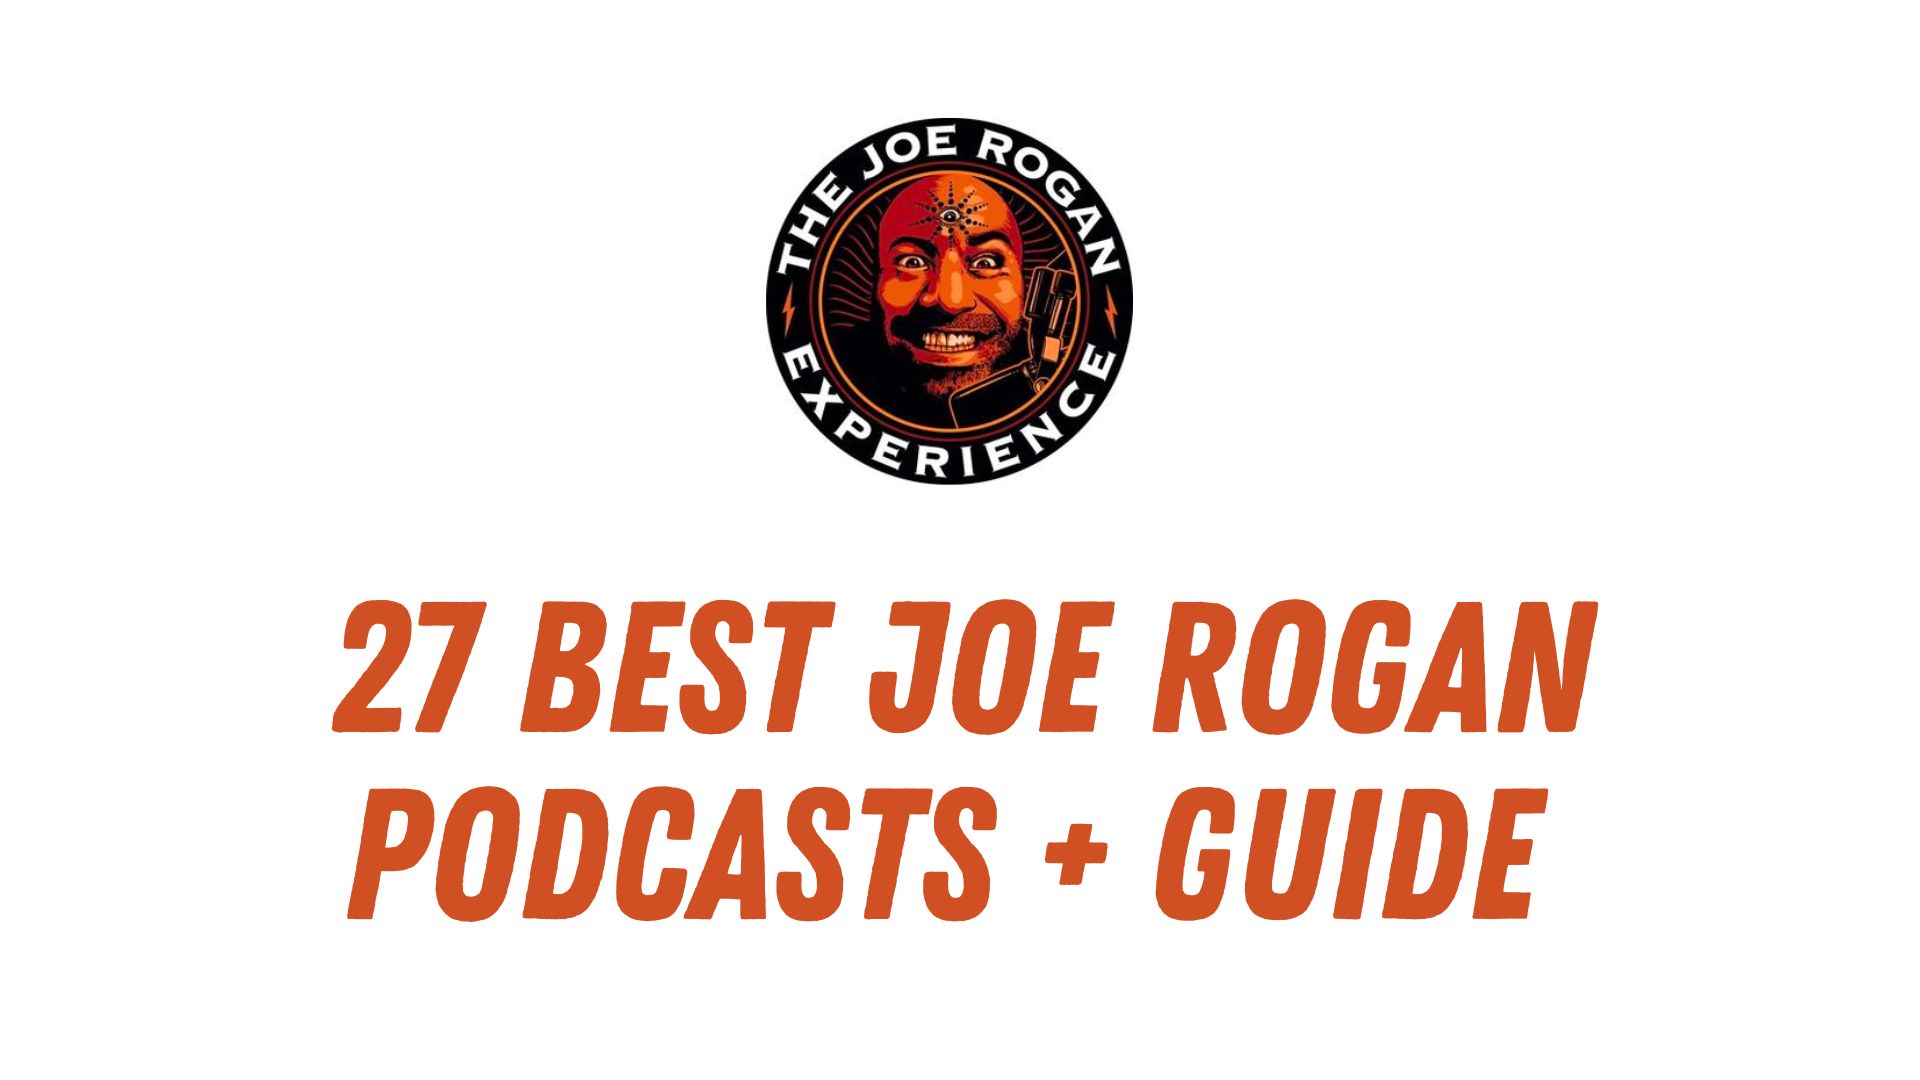 27 Best Joe Rogan Podcasts Ultimate Guide to JRE (2023)